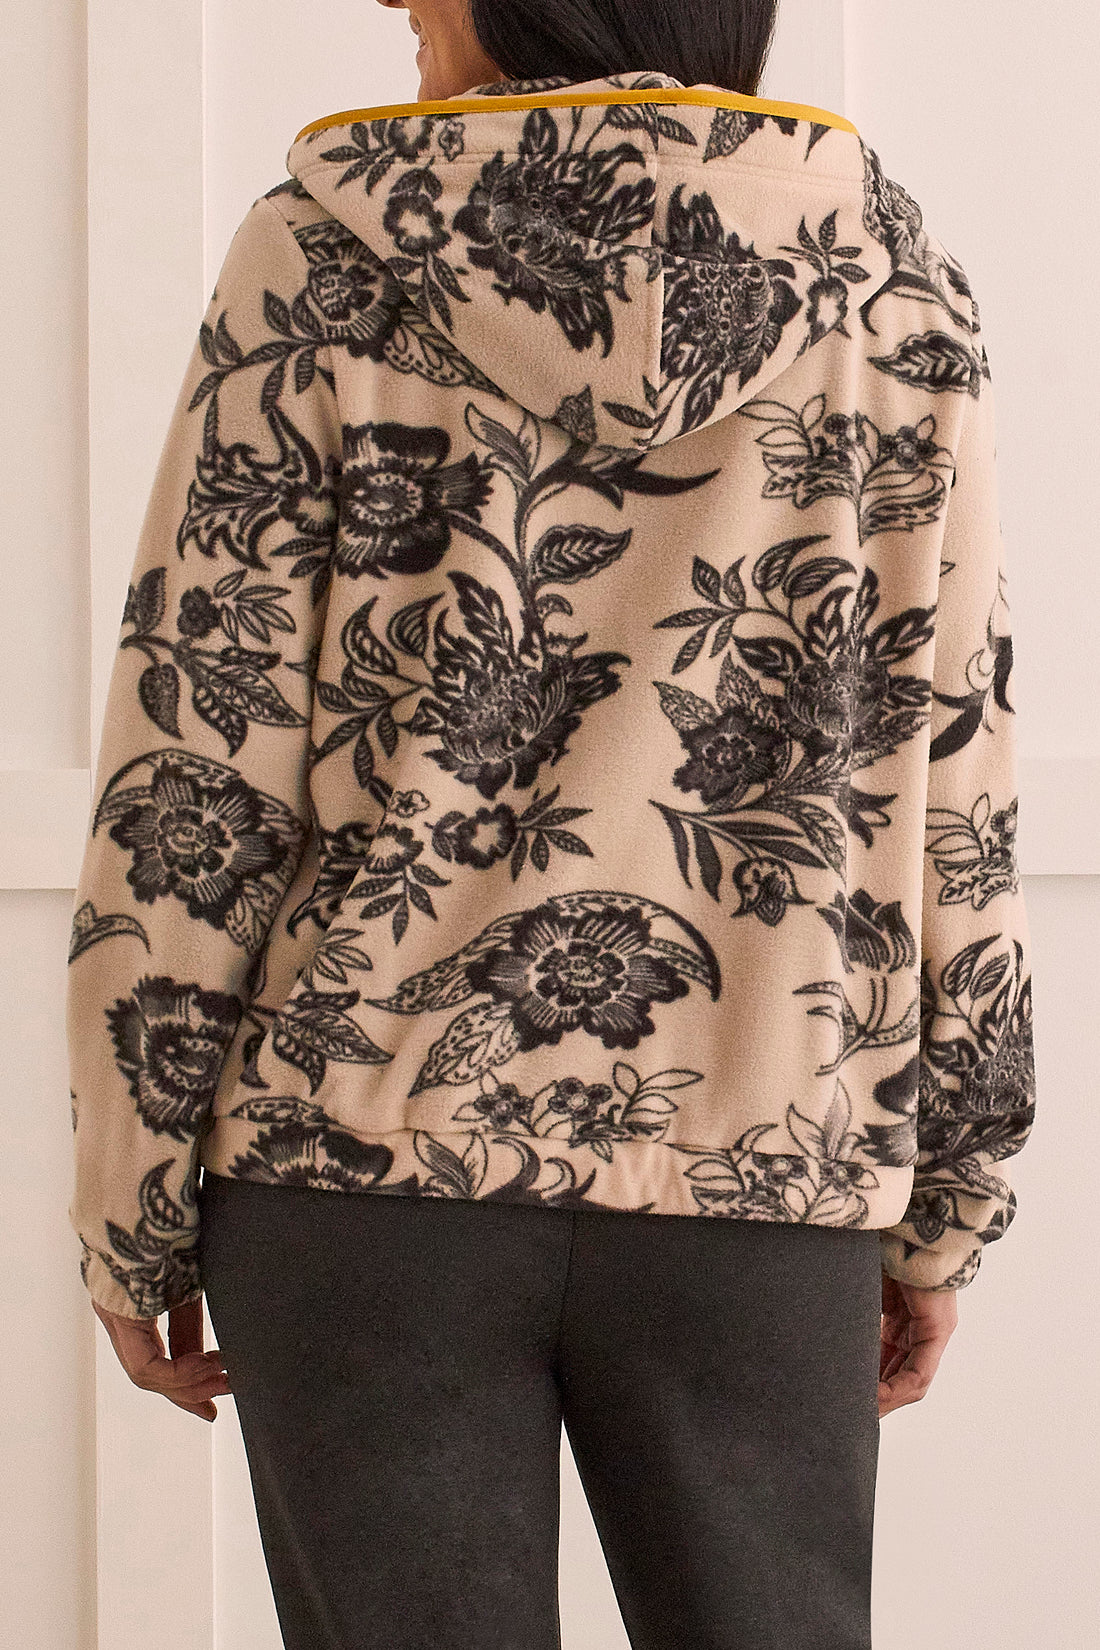 Hooded Print Jacket by Tribal